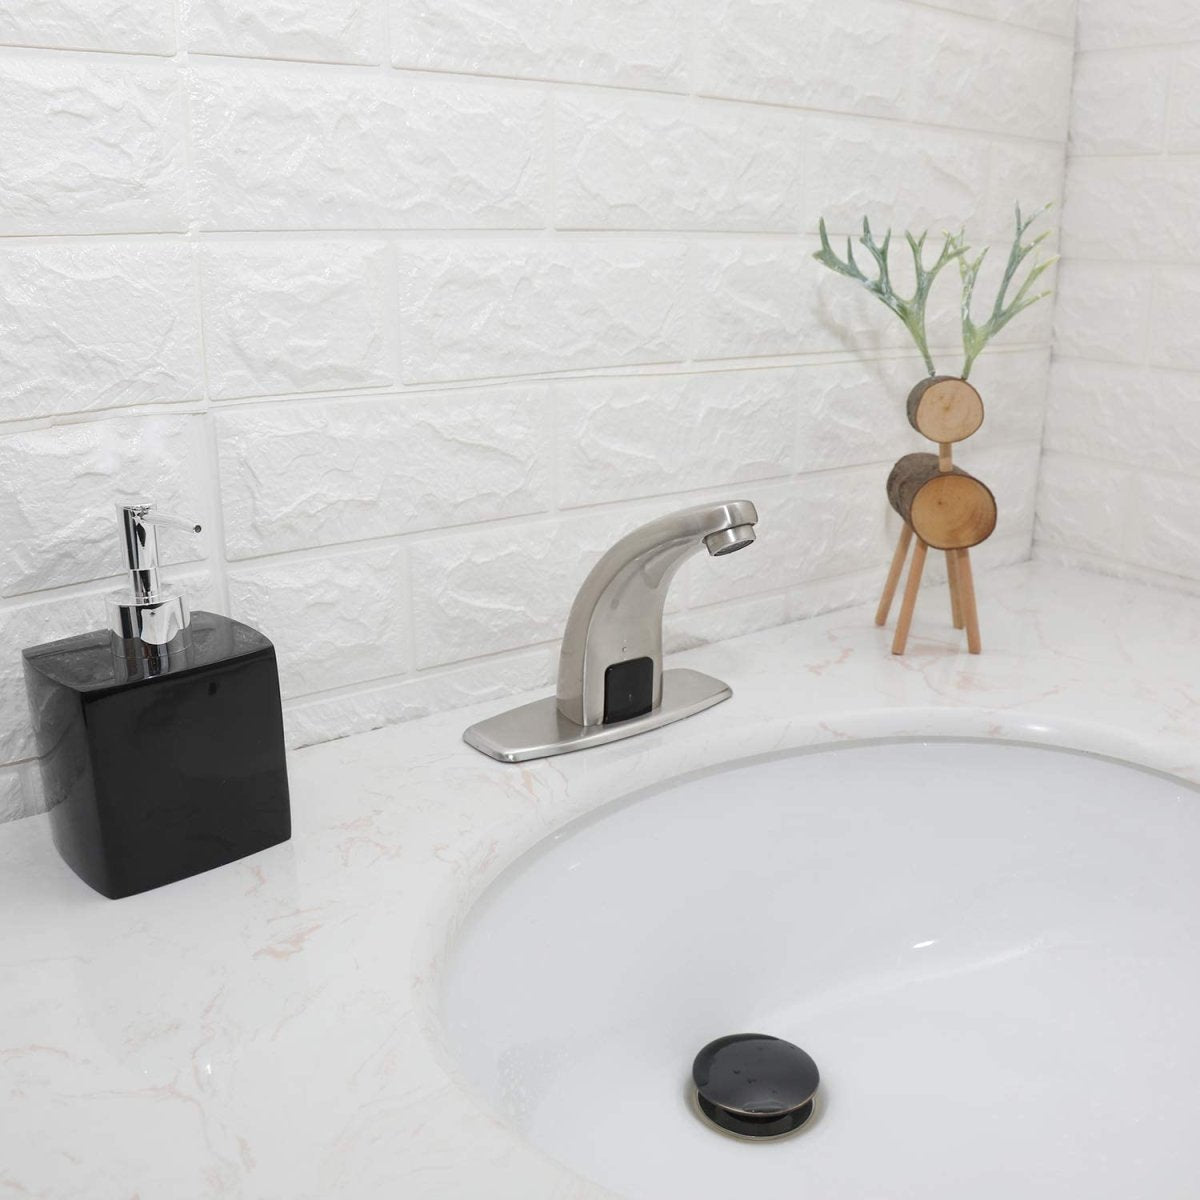 Touchless Bathroom Faucet with Deckplate & Drain Nickel - buyfaucet.com